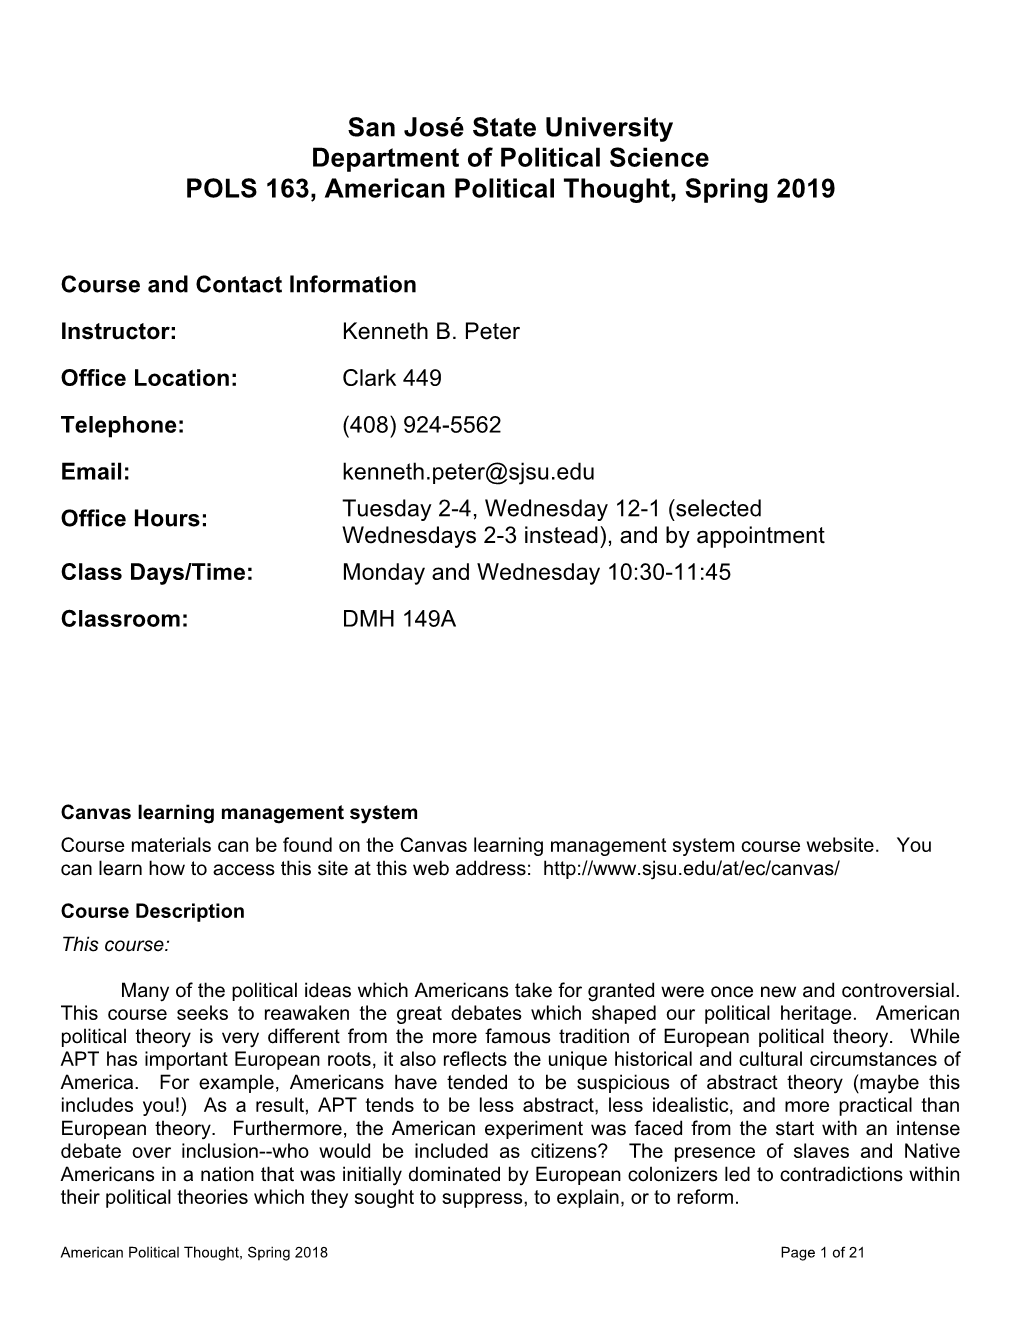 American Political Thought, Spring 2019